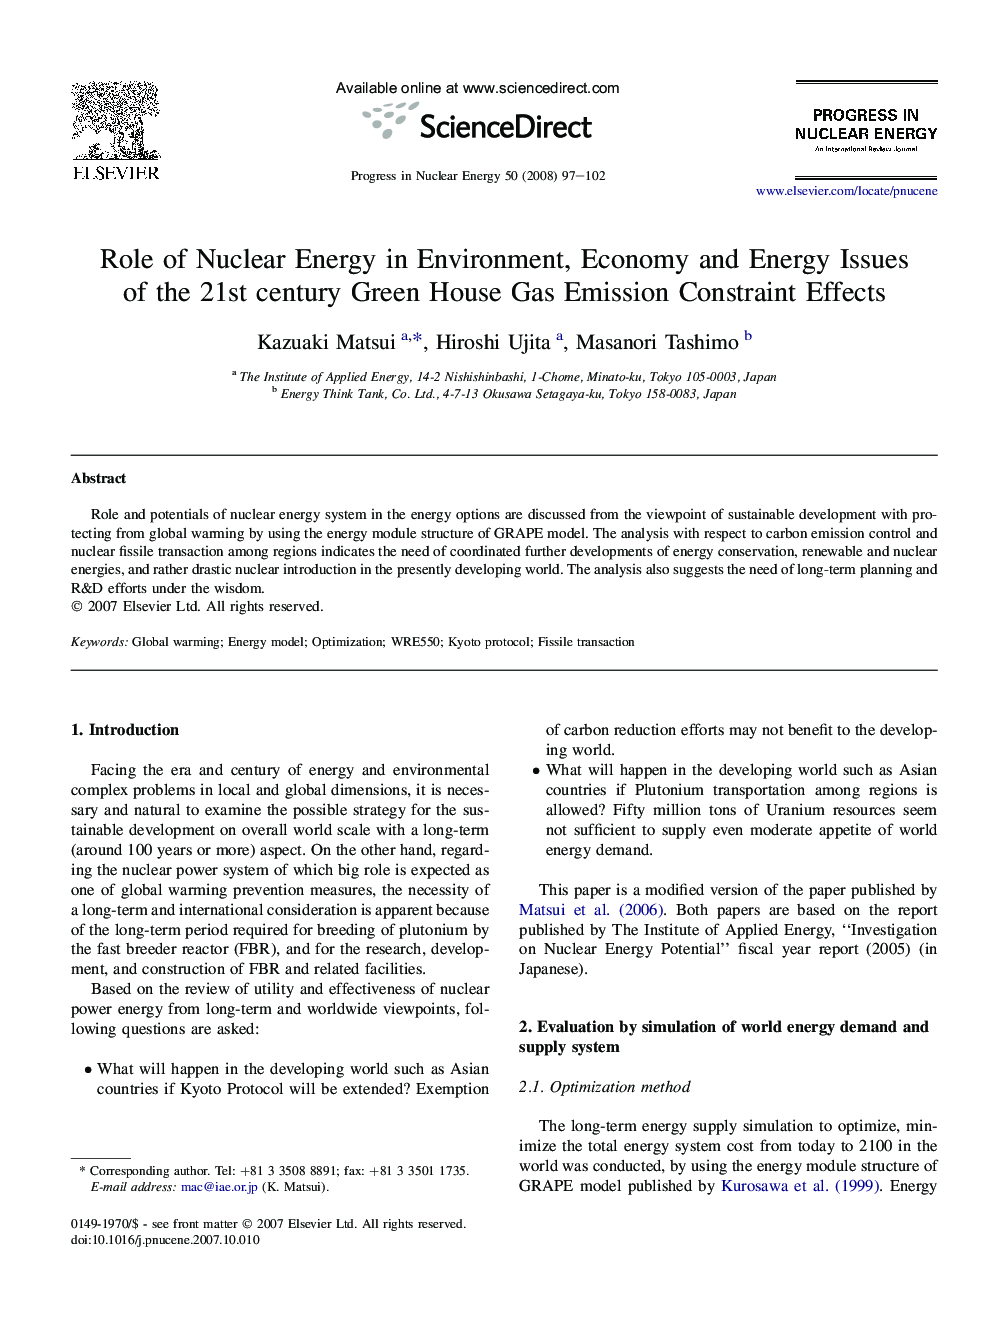 Role of Nuclear Energy in Environment, Economy and Energy Issues of the 21st century Green House Gas Emission Constraint Effects